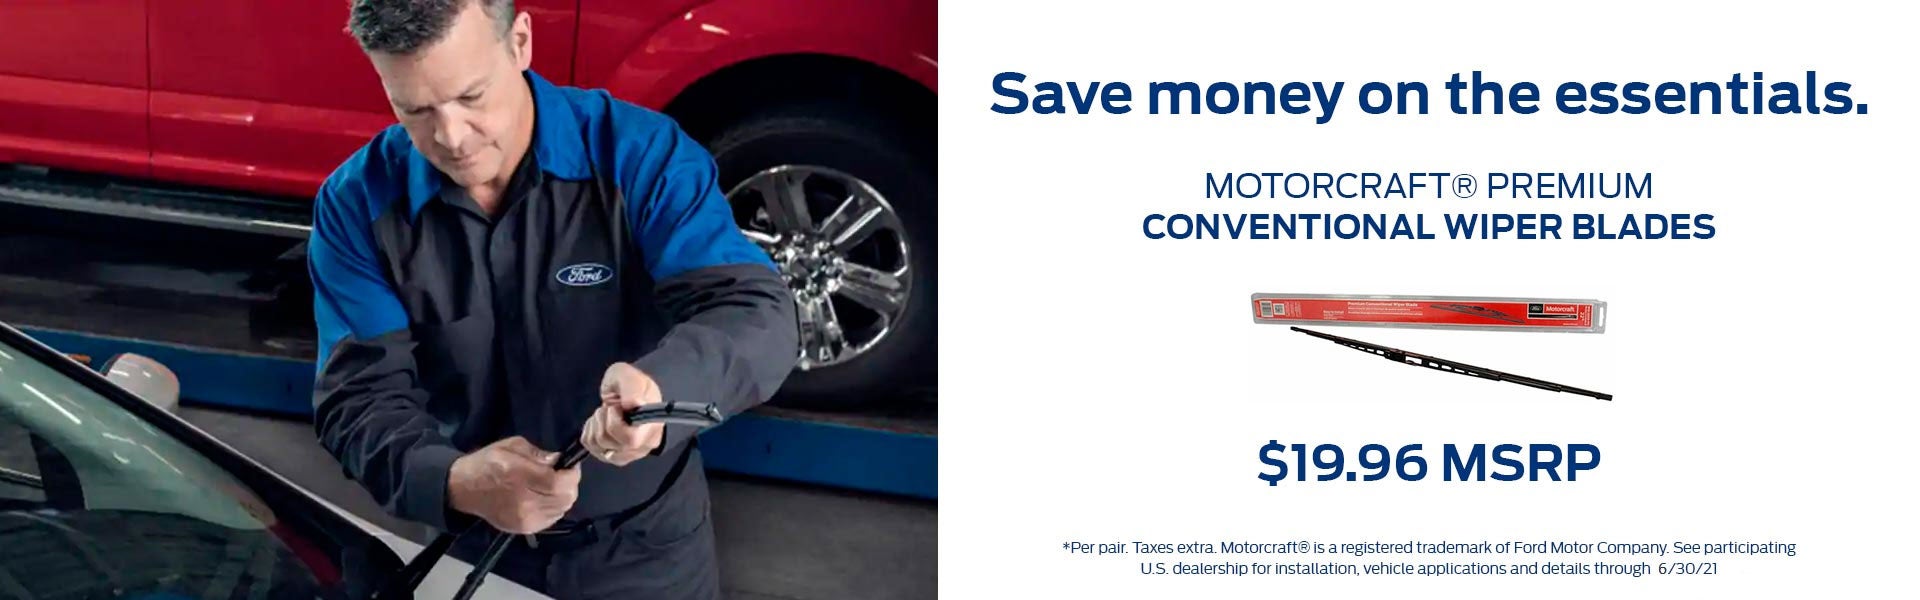 Save money on the essentials. Get Motorcraft® Premium Conventional Wiper Blades for $19.96 MSRP per pair. Taxes extra. Motorcraft® is a registered trademark of Ford Motor Company. See participating U.S. dealership for installation, vehicle application, and details through 12/31/20. Click to print this offer.